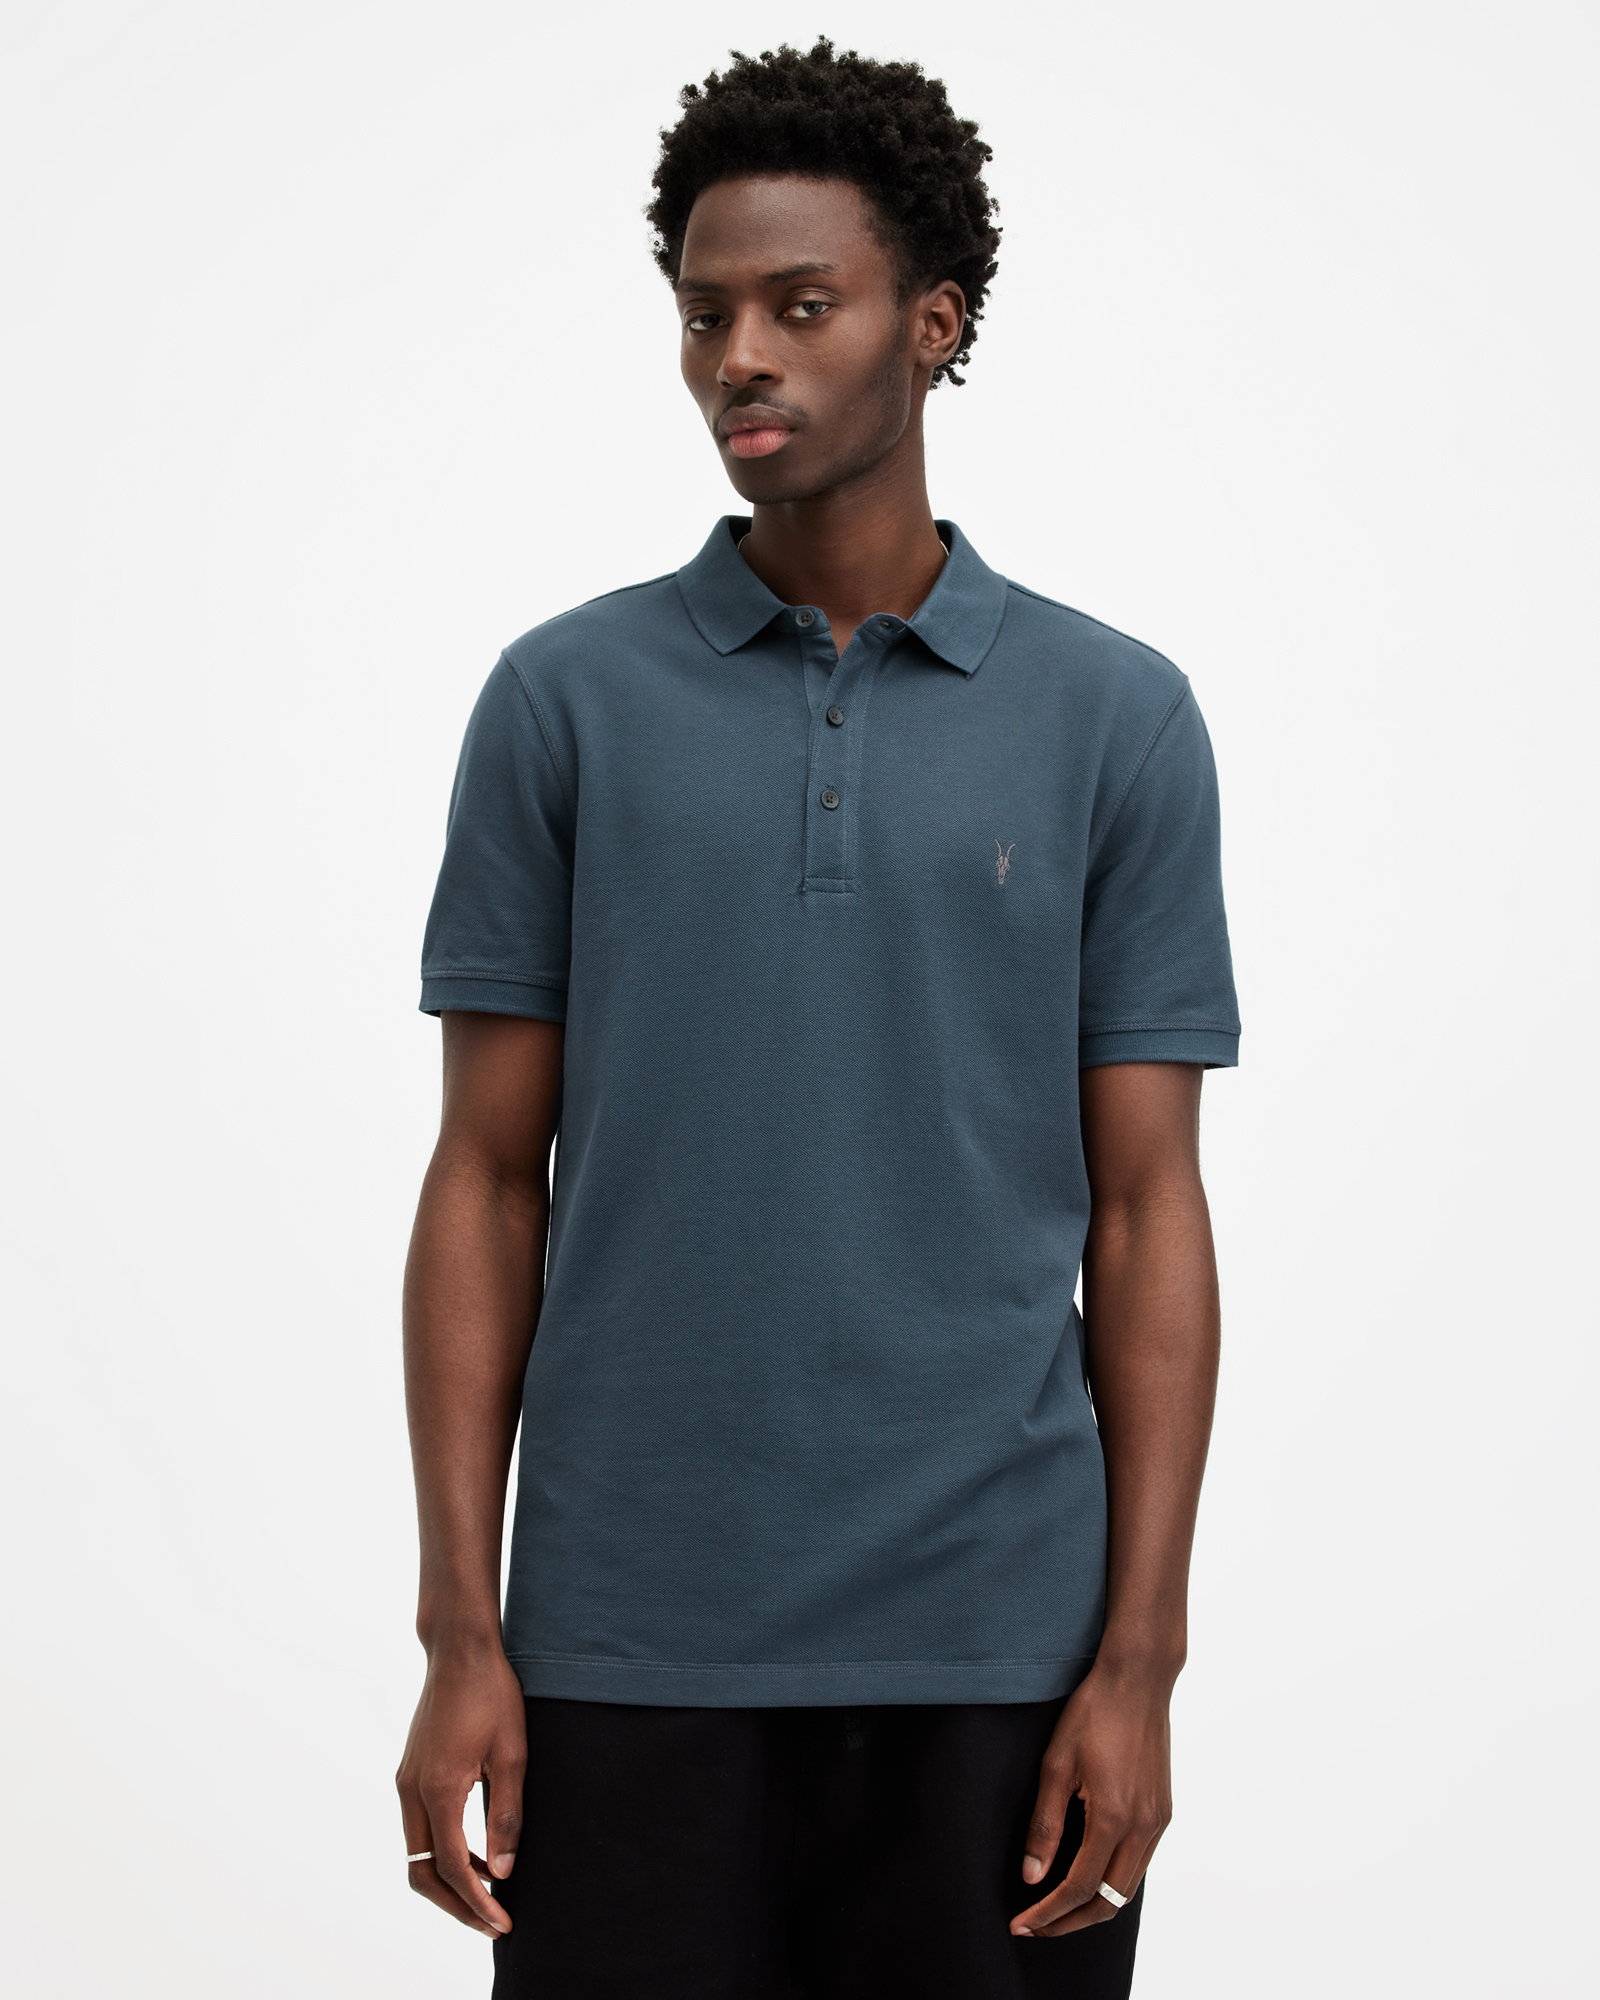 AllSaints Reform Short Sleeve Polo Shirt,, Workers Blue